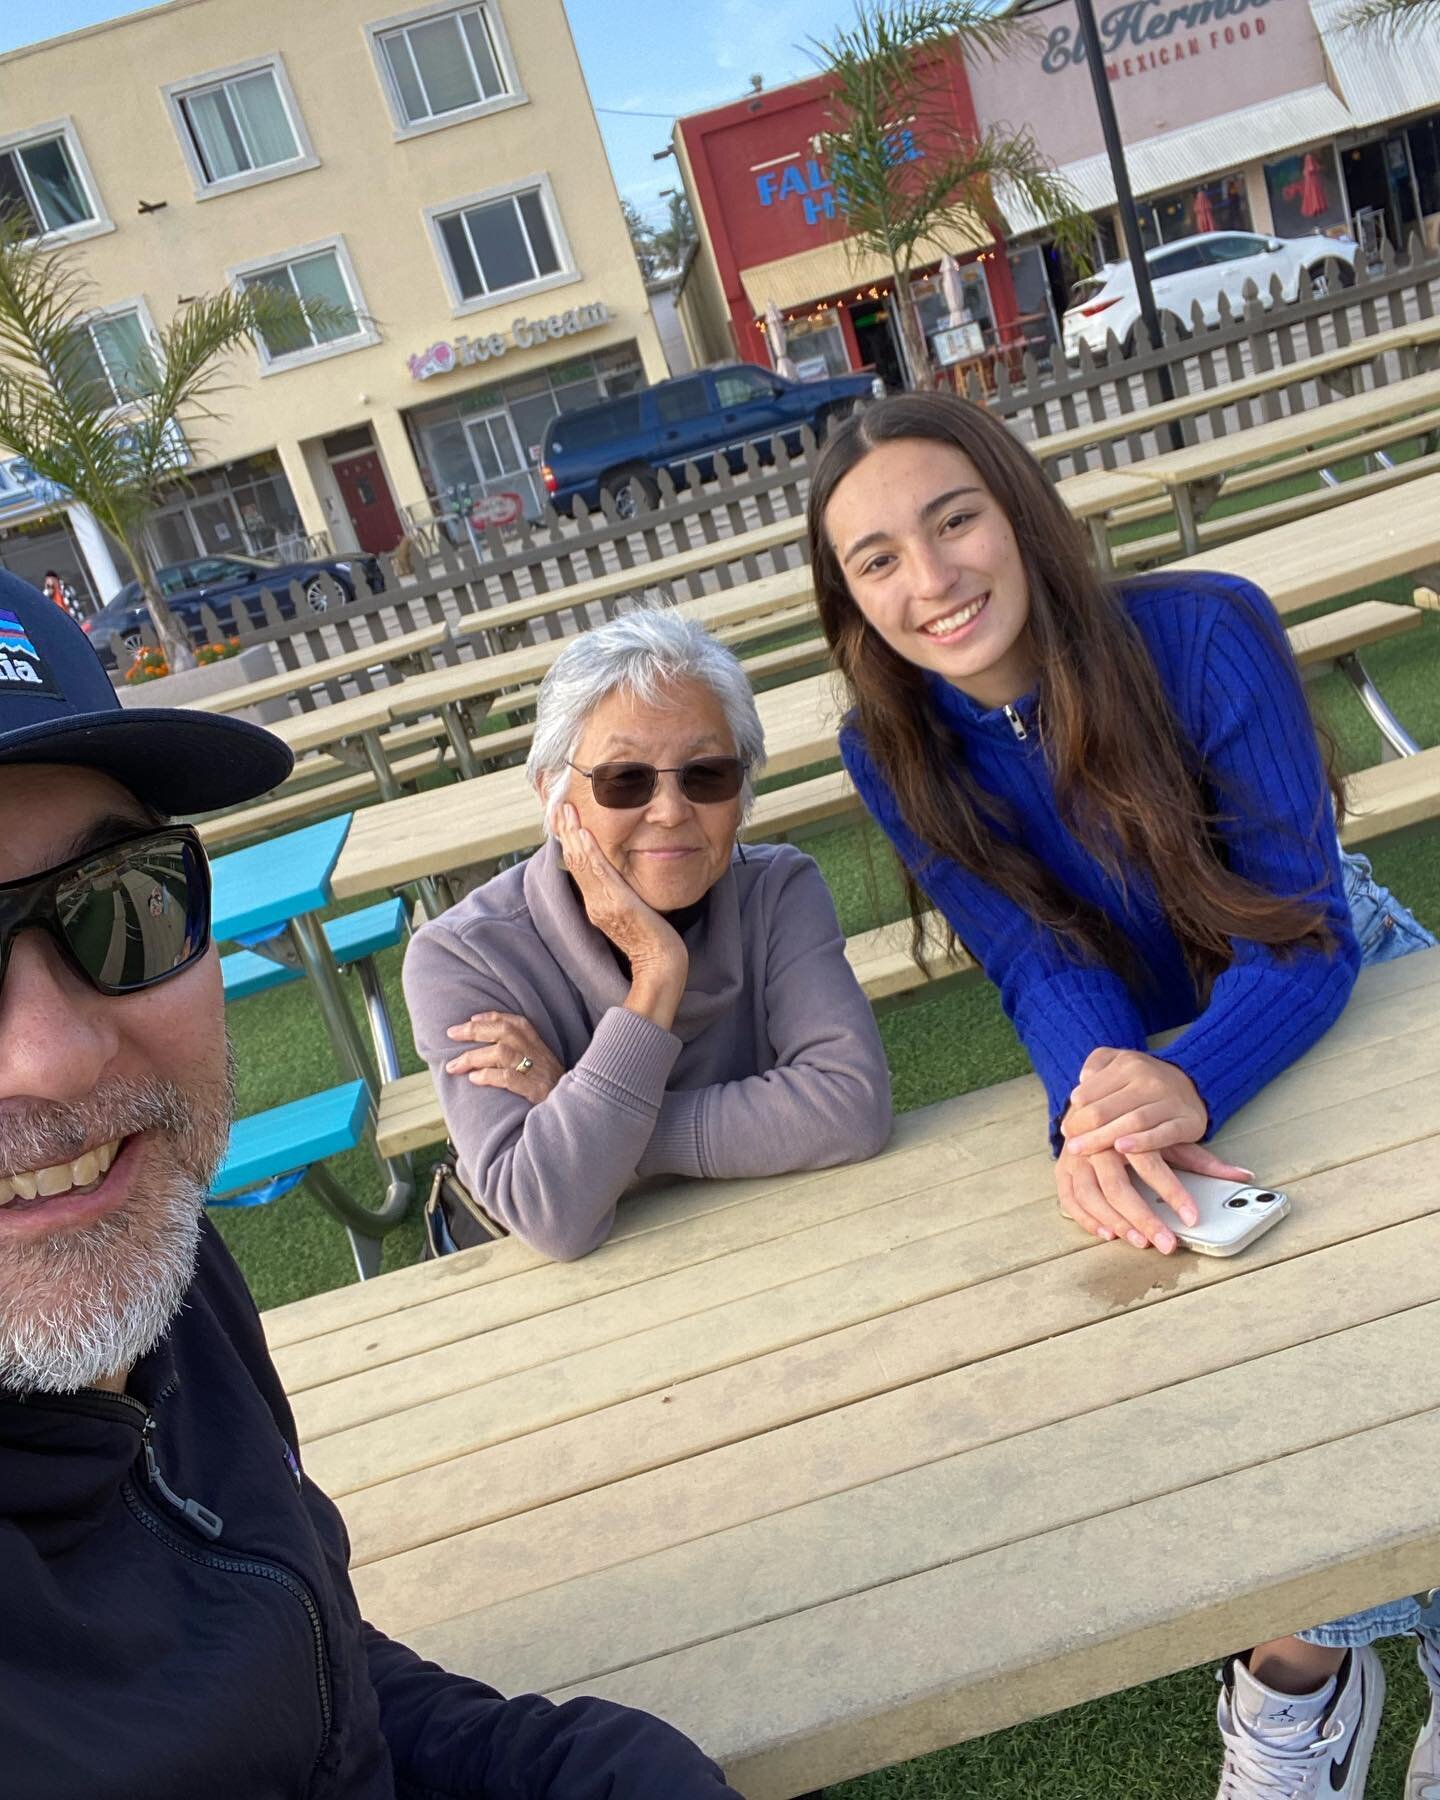 Squeezed in a quick visit with my mom and Skyla. Three generations of UC students! Bears, Aggies and Banana Slugs oh my!
#universityofcalifornia